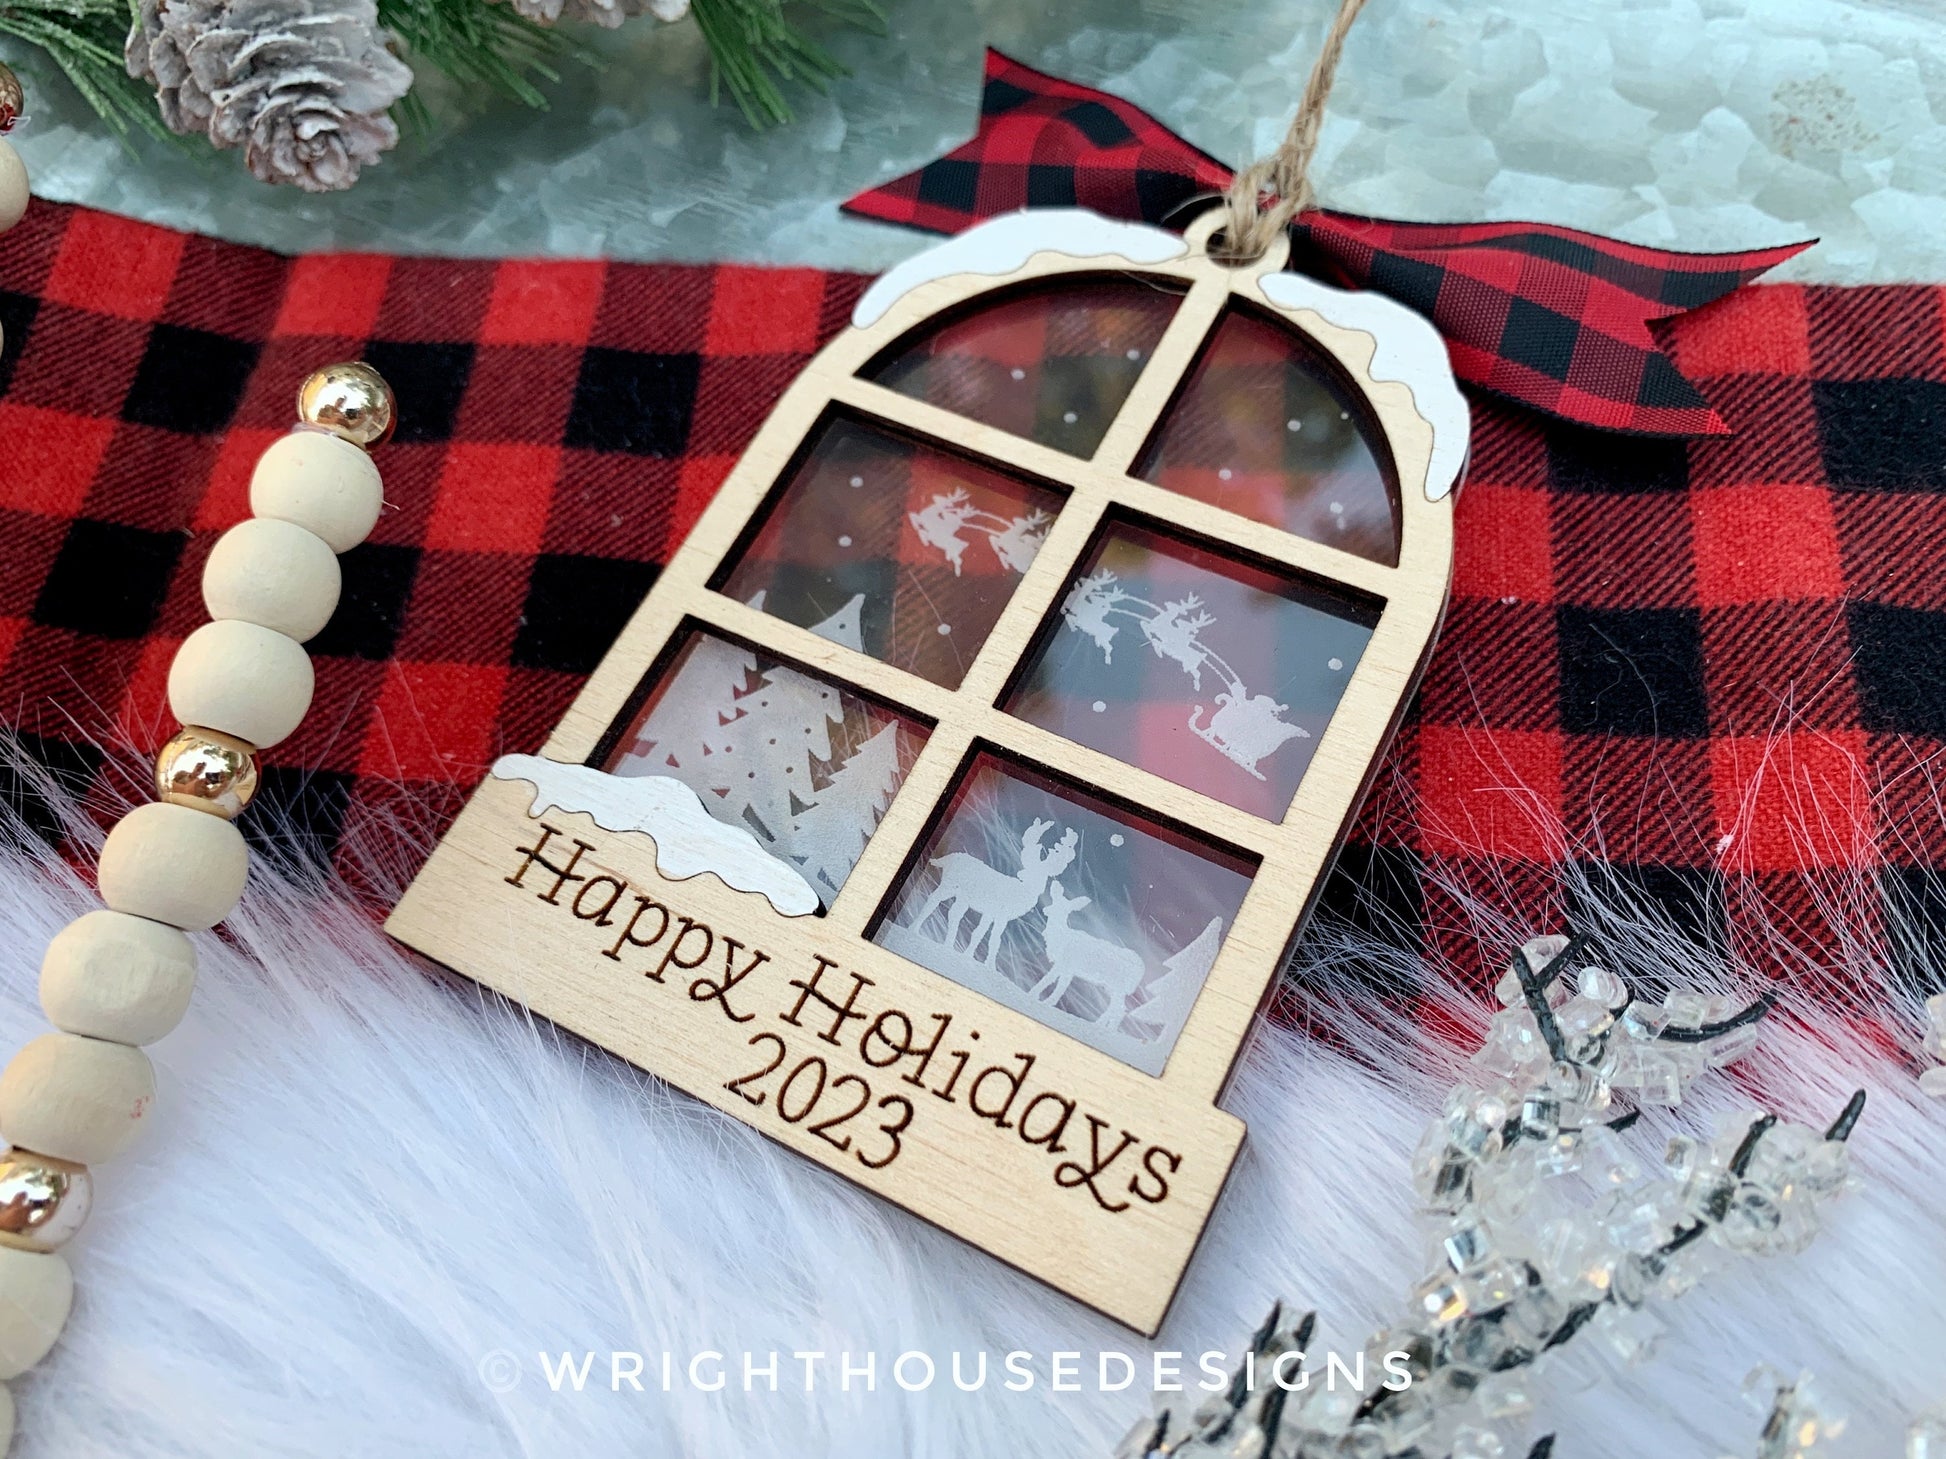 Santa Sleigh Winter Woodland Scene Ornament - Engraved Personalized Yearly Christmas Eve Ornament - Layered Wood and Acrylic Window Ornament